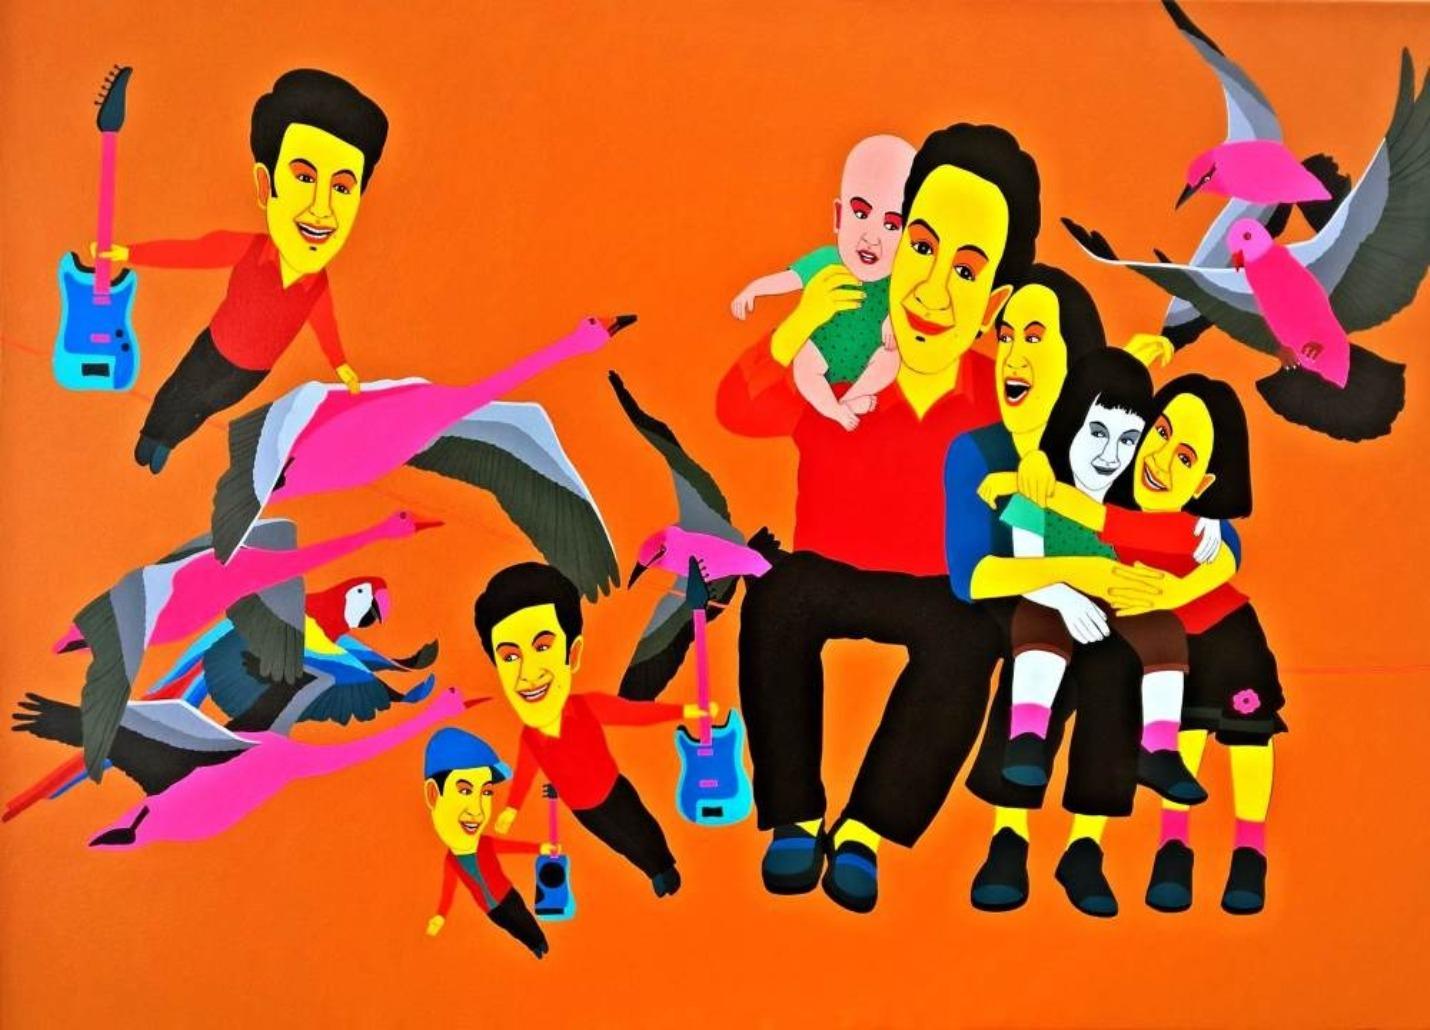 Farhad Hussain Figurative Painting - Playing, Acrylic on Canvas, Orange, Red, Yellow by Indian Artist "In Stock"